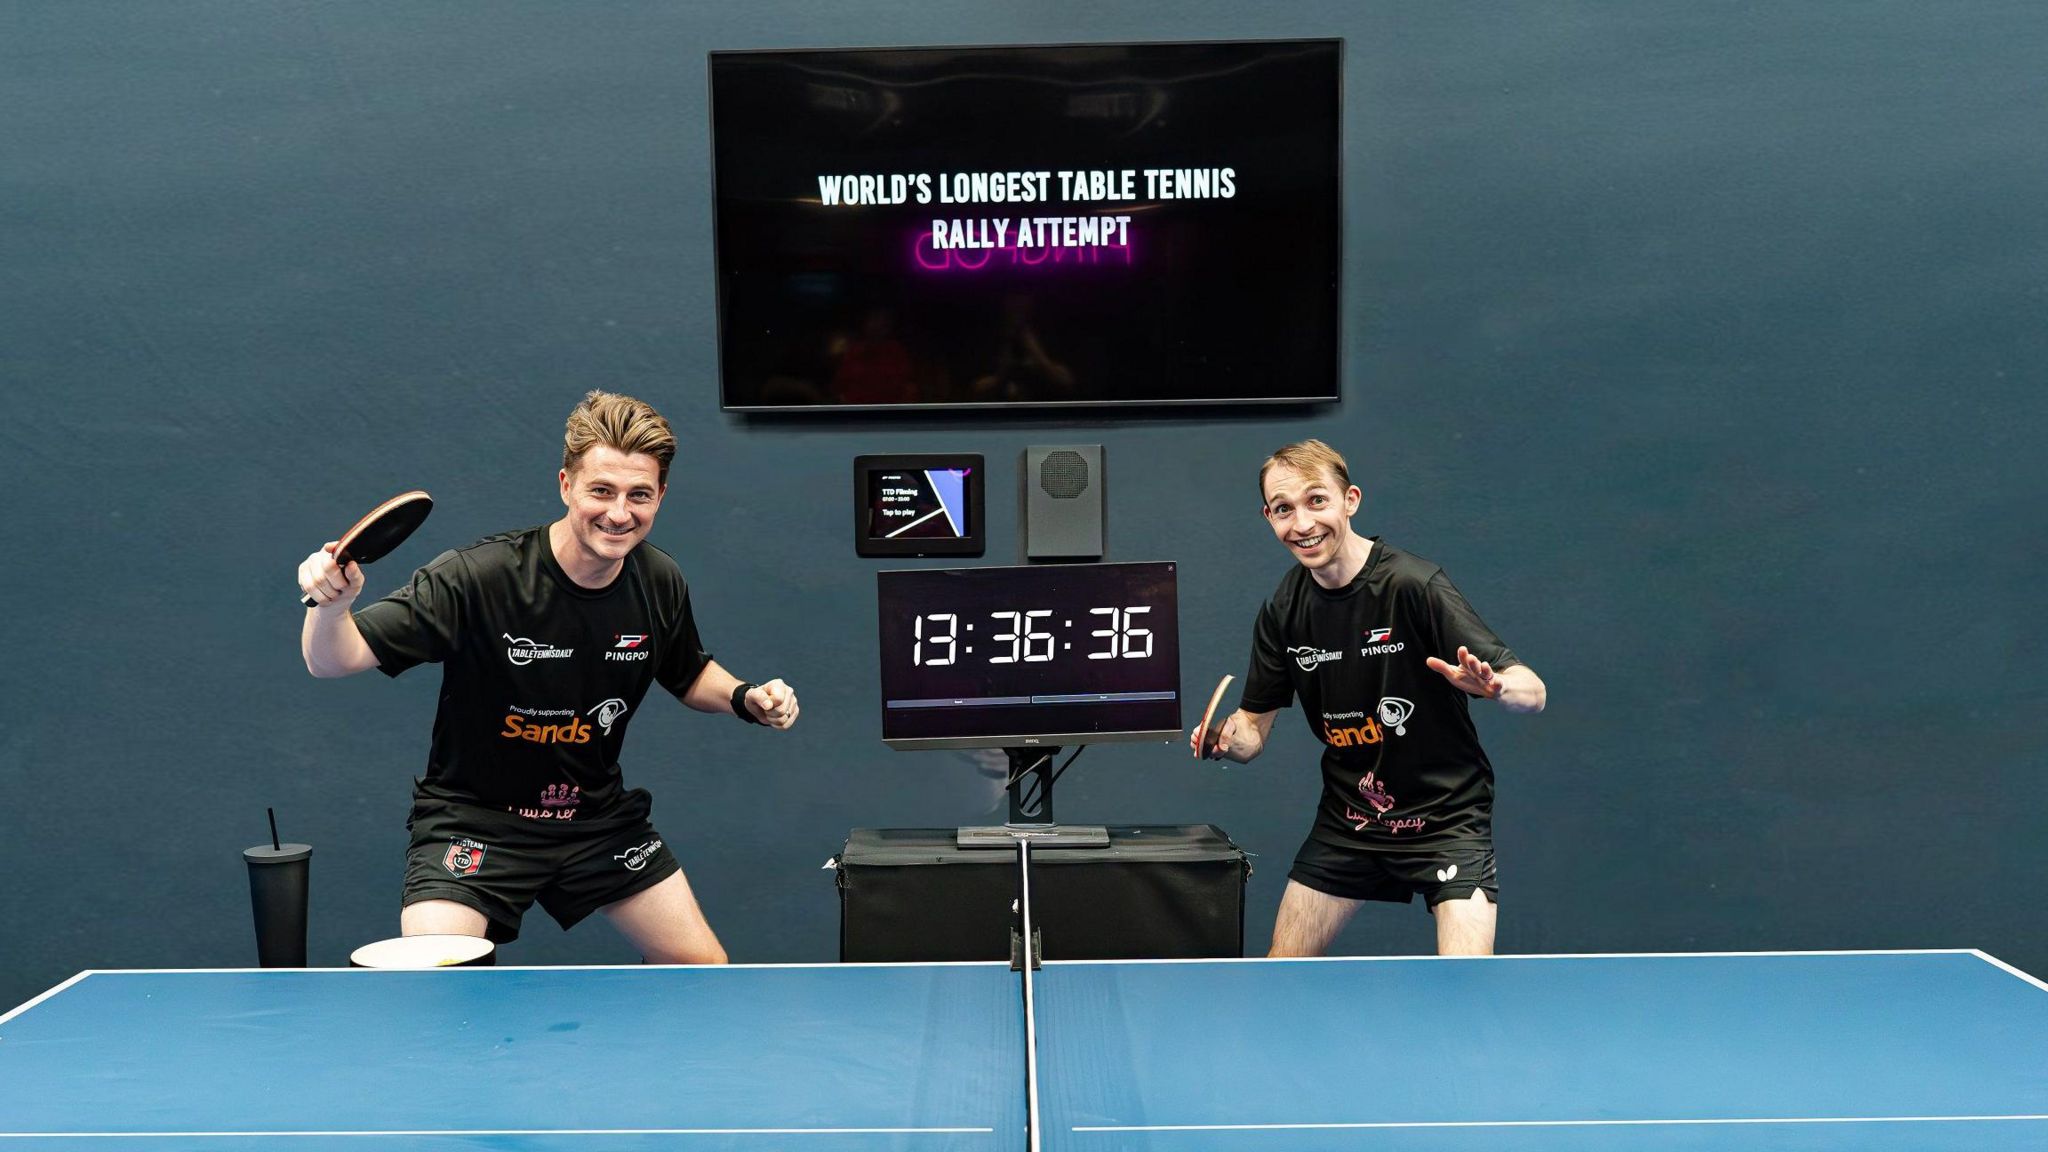 Image of Dan Ives and Lloyd Gregory. They are by a table tennis table and a clock reading 13 hours 36 mins 36 secs. 